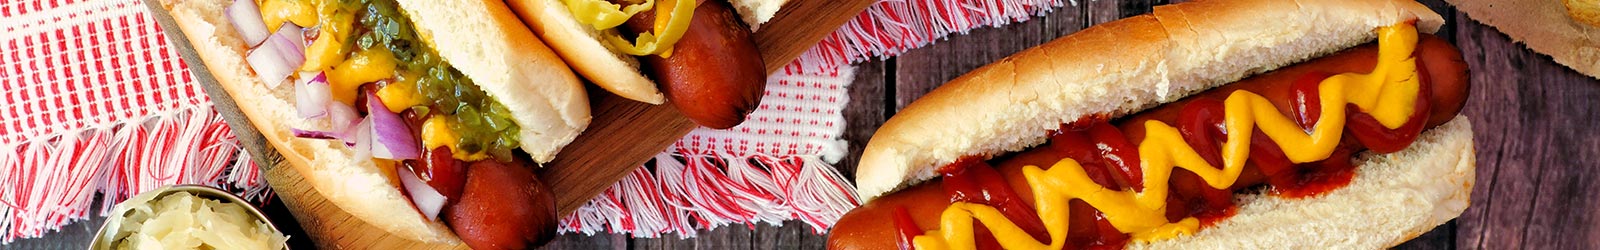 Hot Dogs with ketchup and mustard